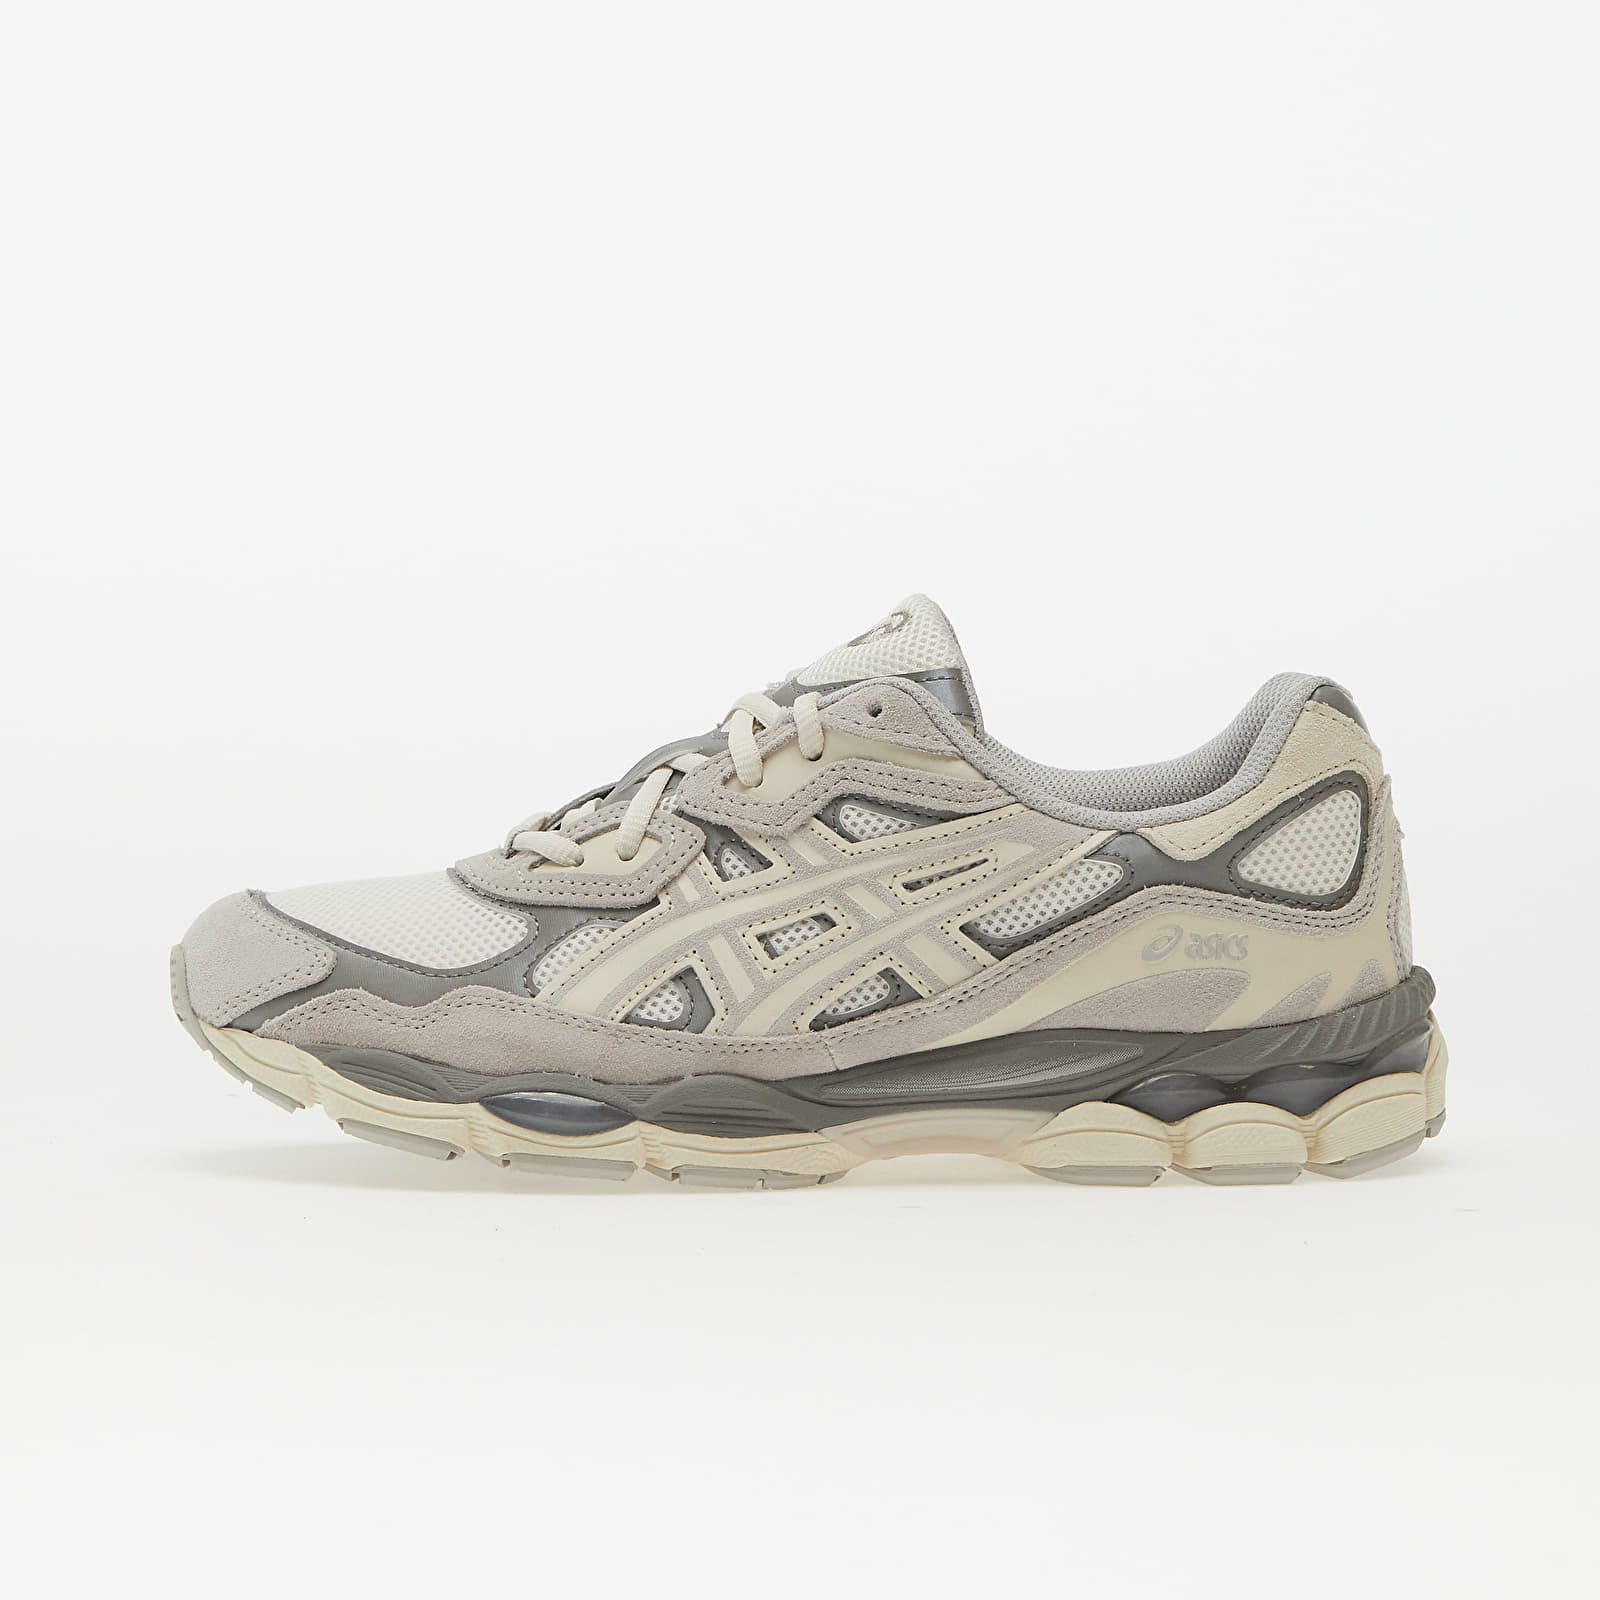 Men's shoes Asics Gel-NYC Cream/ Oyster Grey